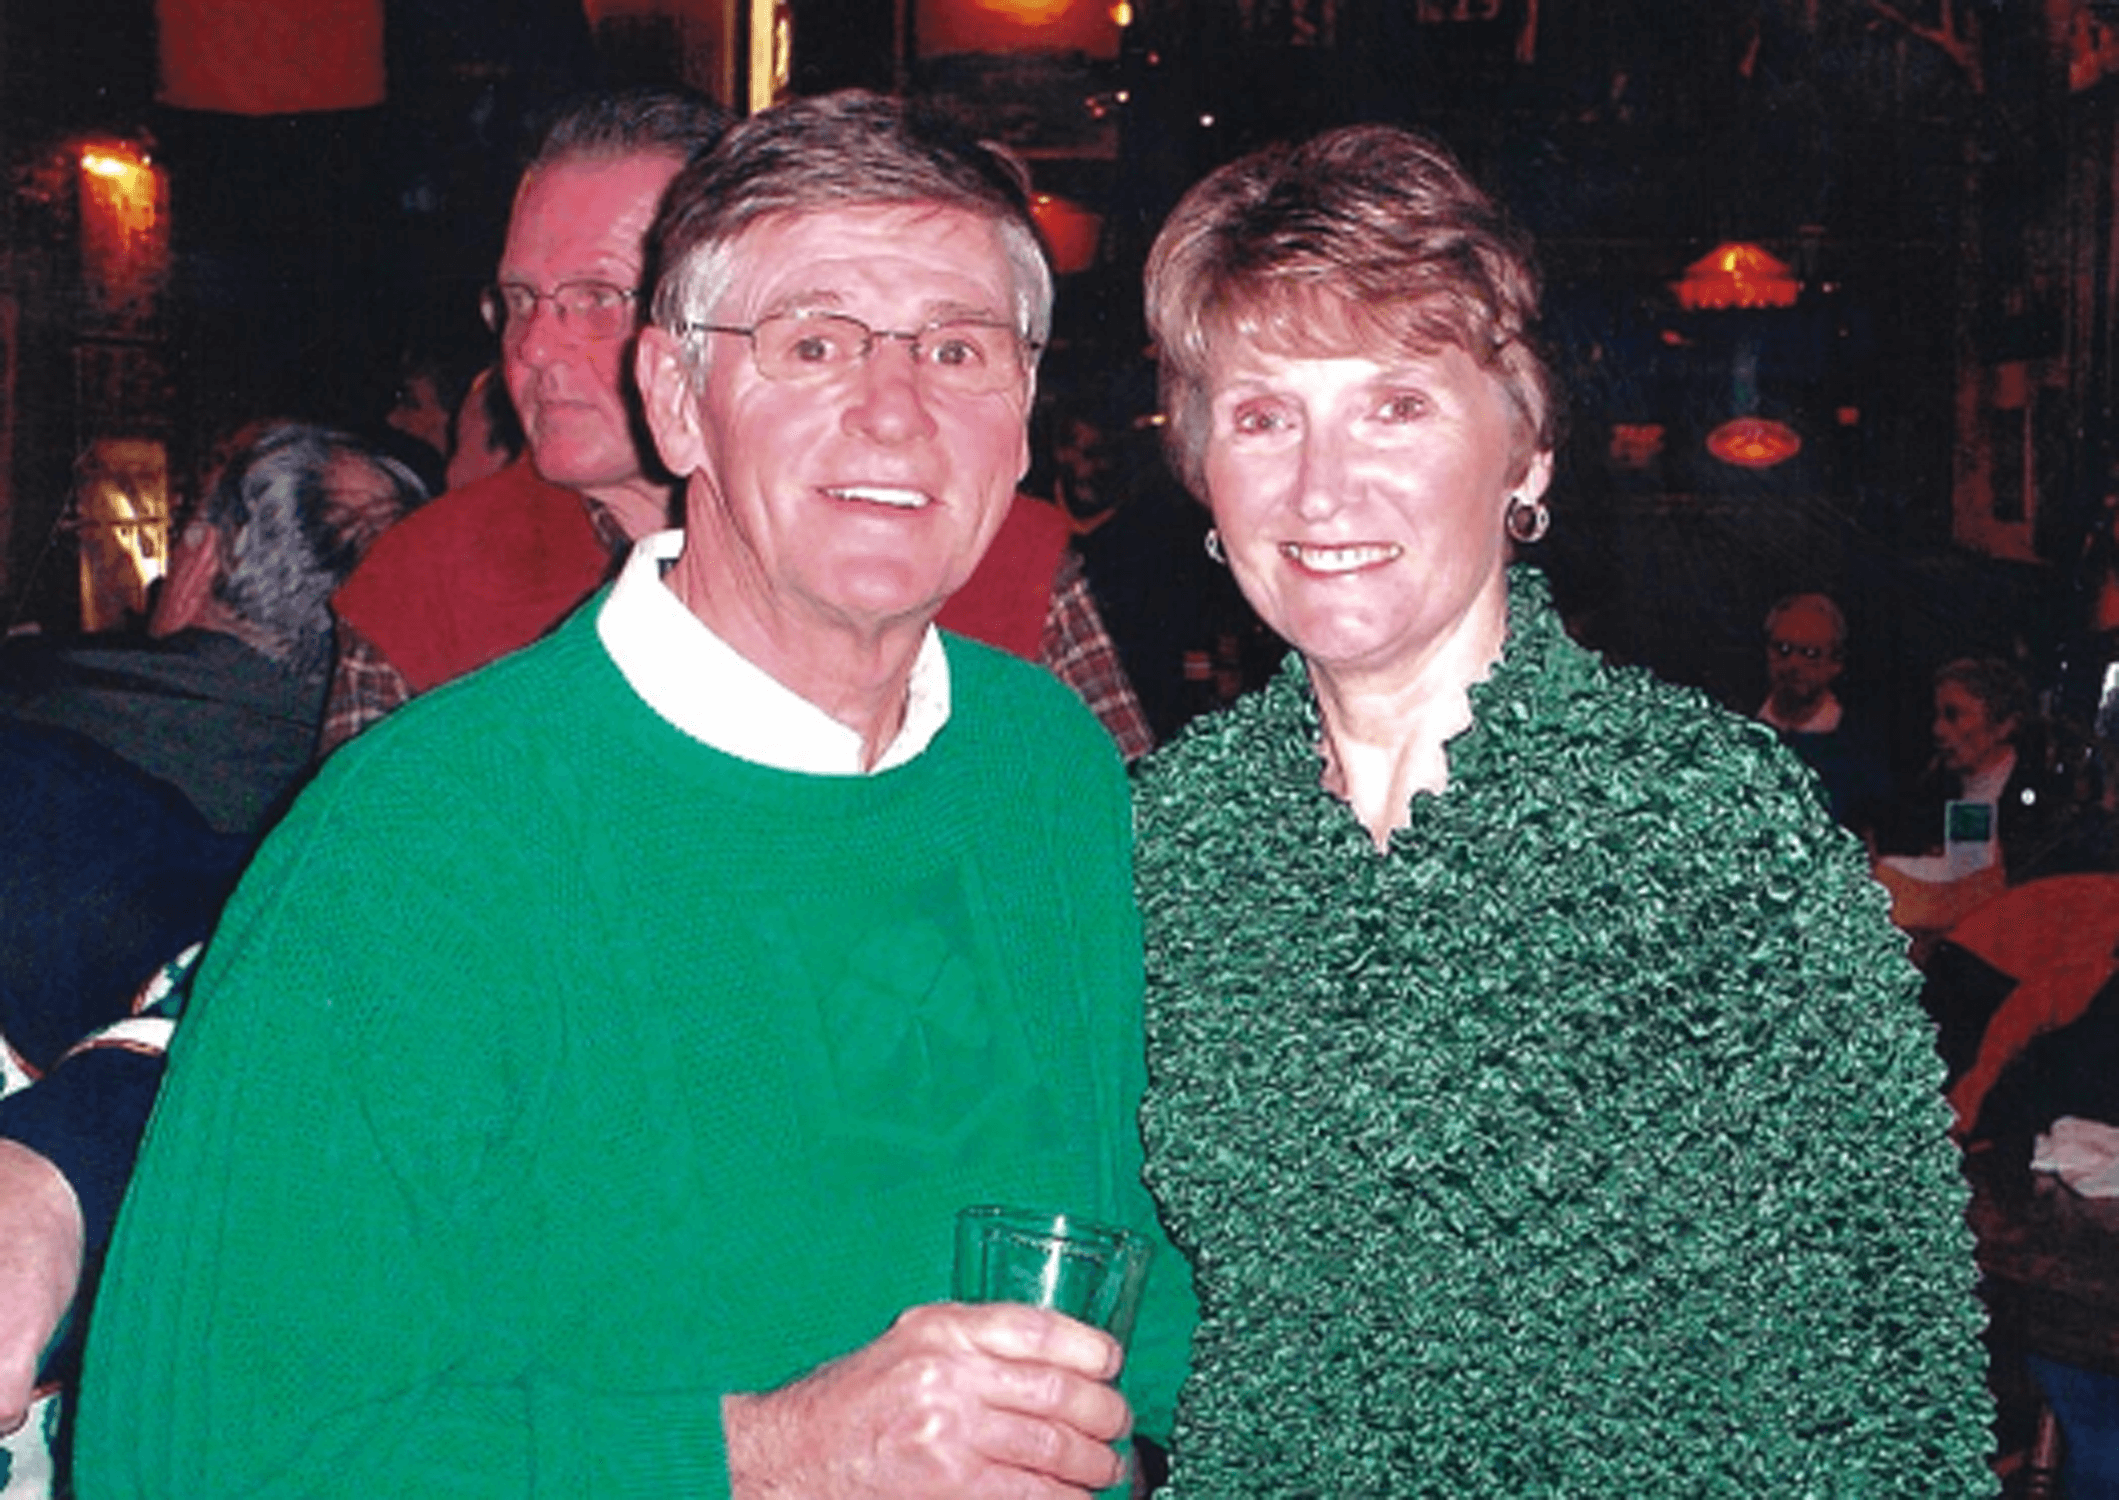 Kathy and Jack Lucey created an Alzheimer's fund to support caregivers